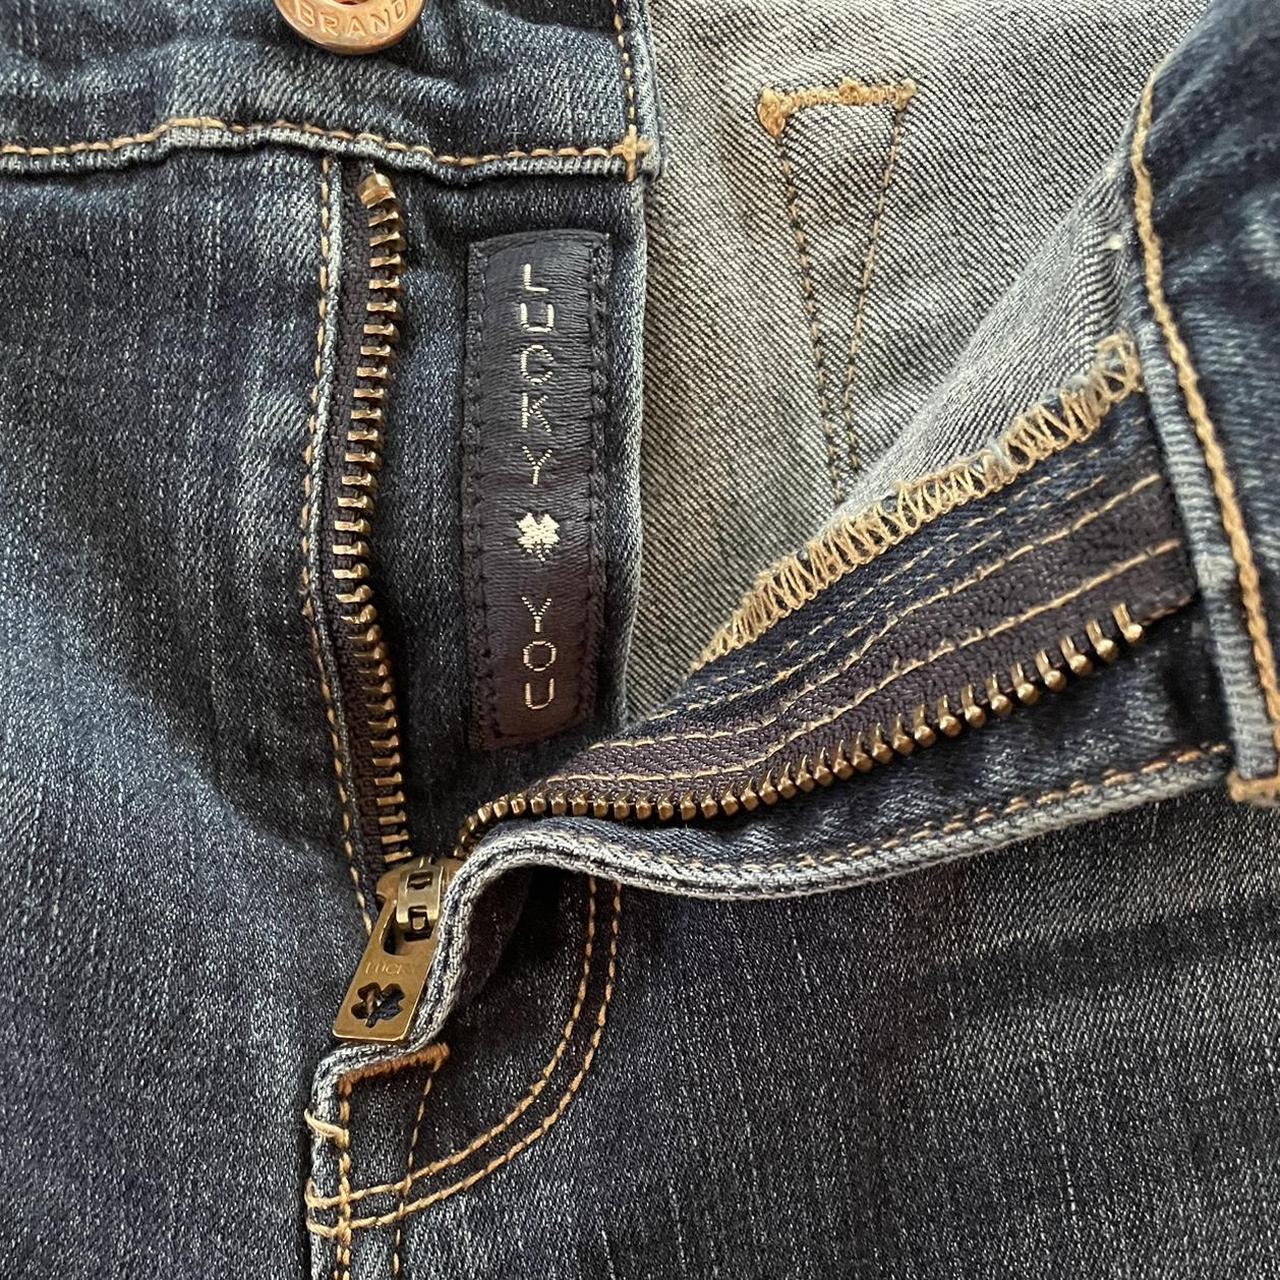 The inside zipper of Lucky Brand jeans says Lucky You. : r/IRLEasterEggs